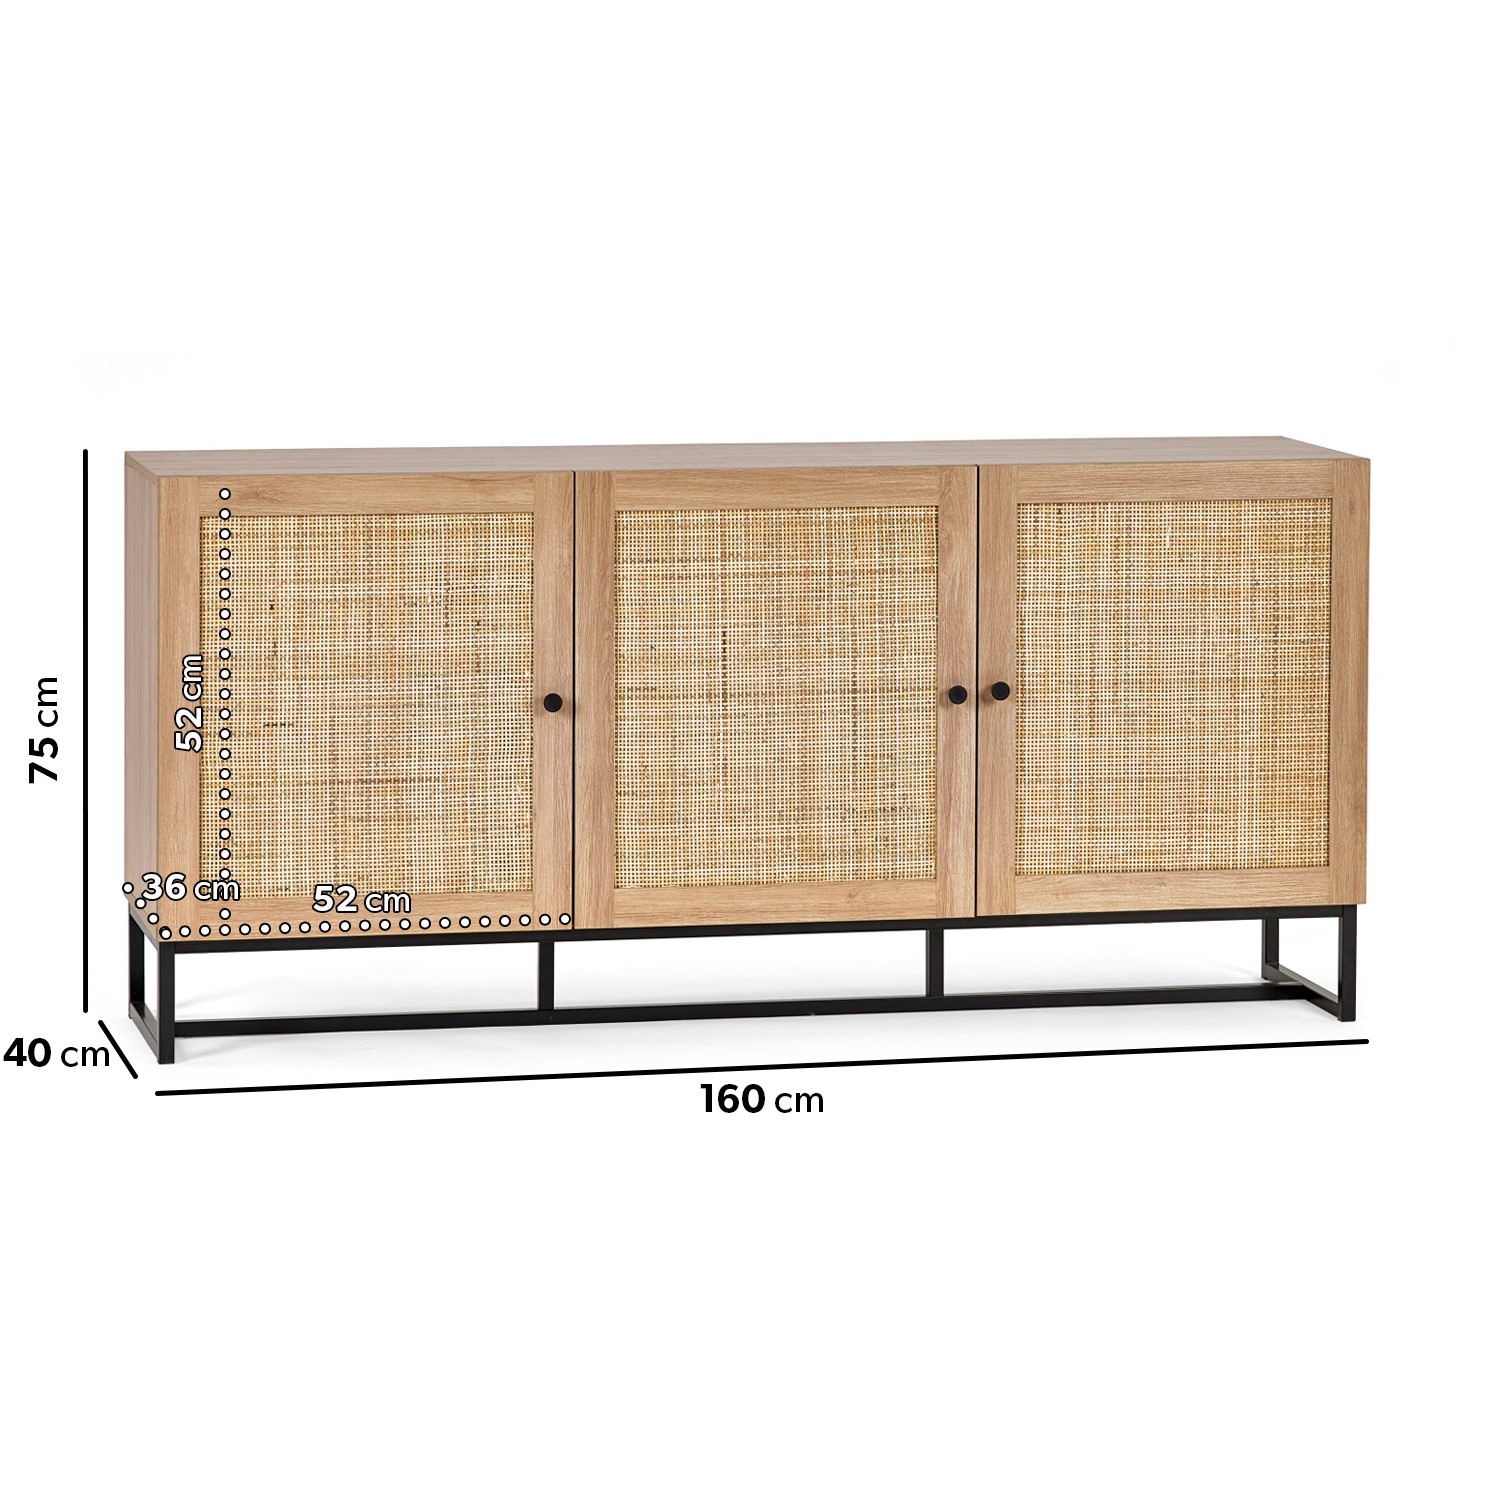 Read more about Large oak sideboard with rattan doors padstow